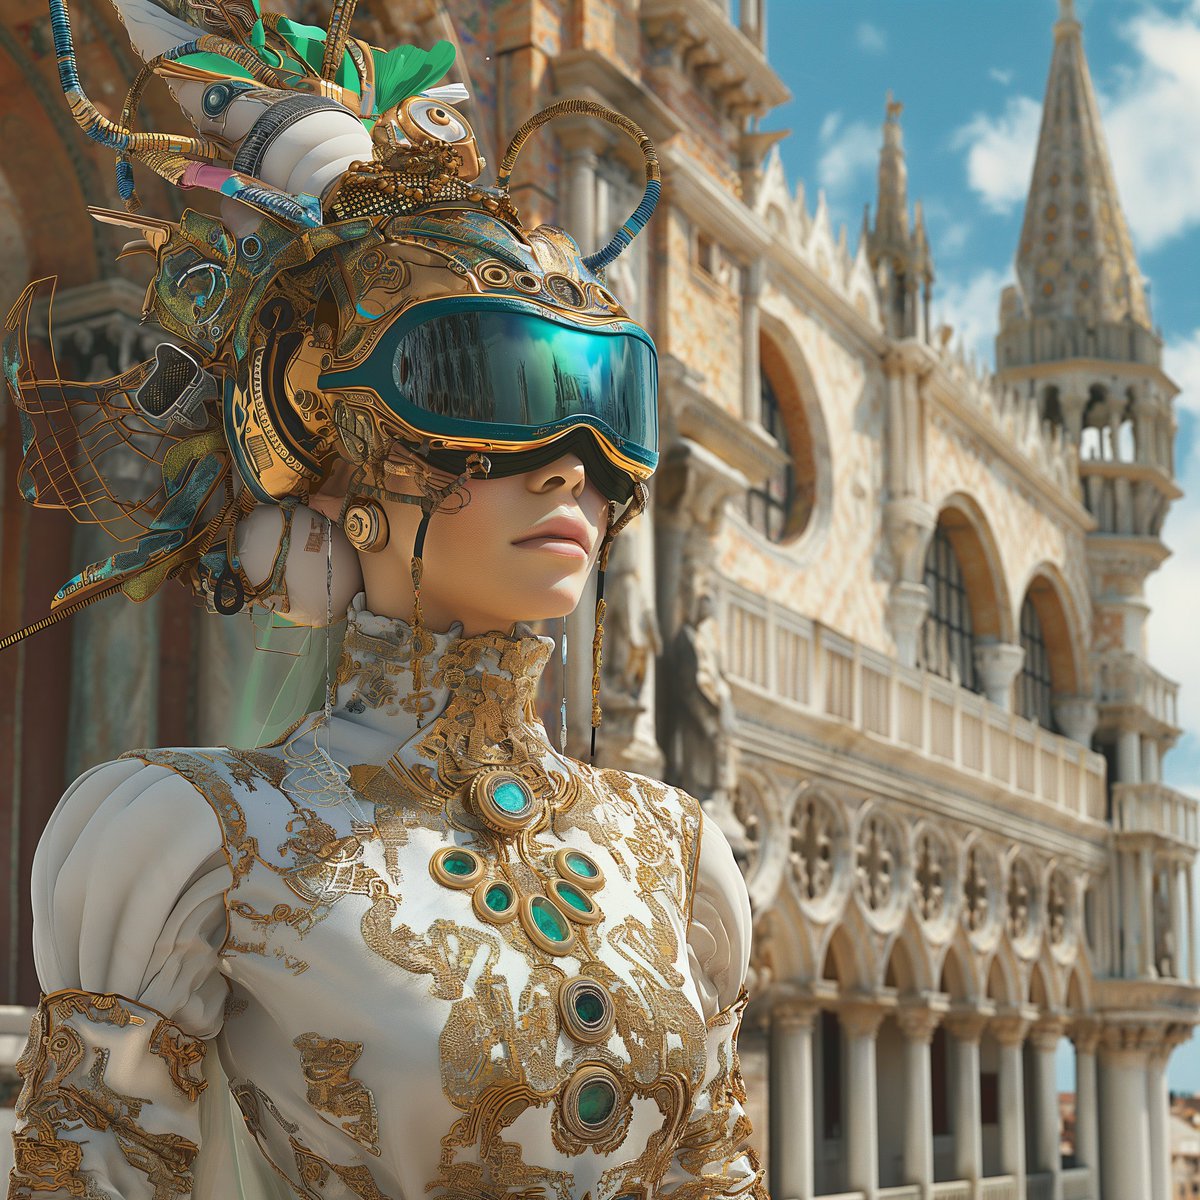 With her #SmartGlasses, Seraphina adds a dash of humor to the tech craze, making even the #Apple #VisionPro wearers chuckle and look good. Dive into her #exquisite  and realistic #AR  #fantasy world.
#Futuristic #Fashion #AnimeArt #TechHumor #AI #WAIFU